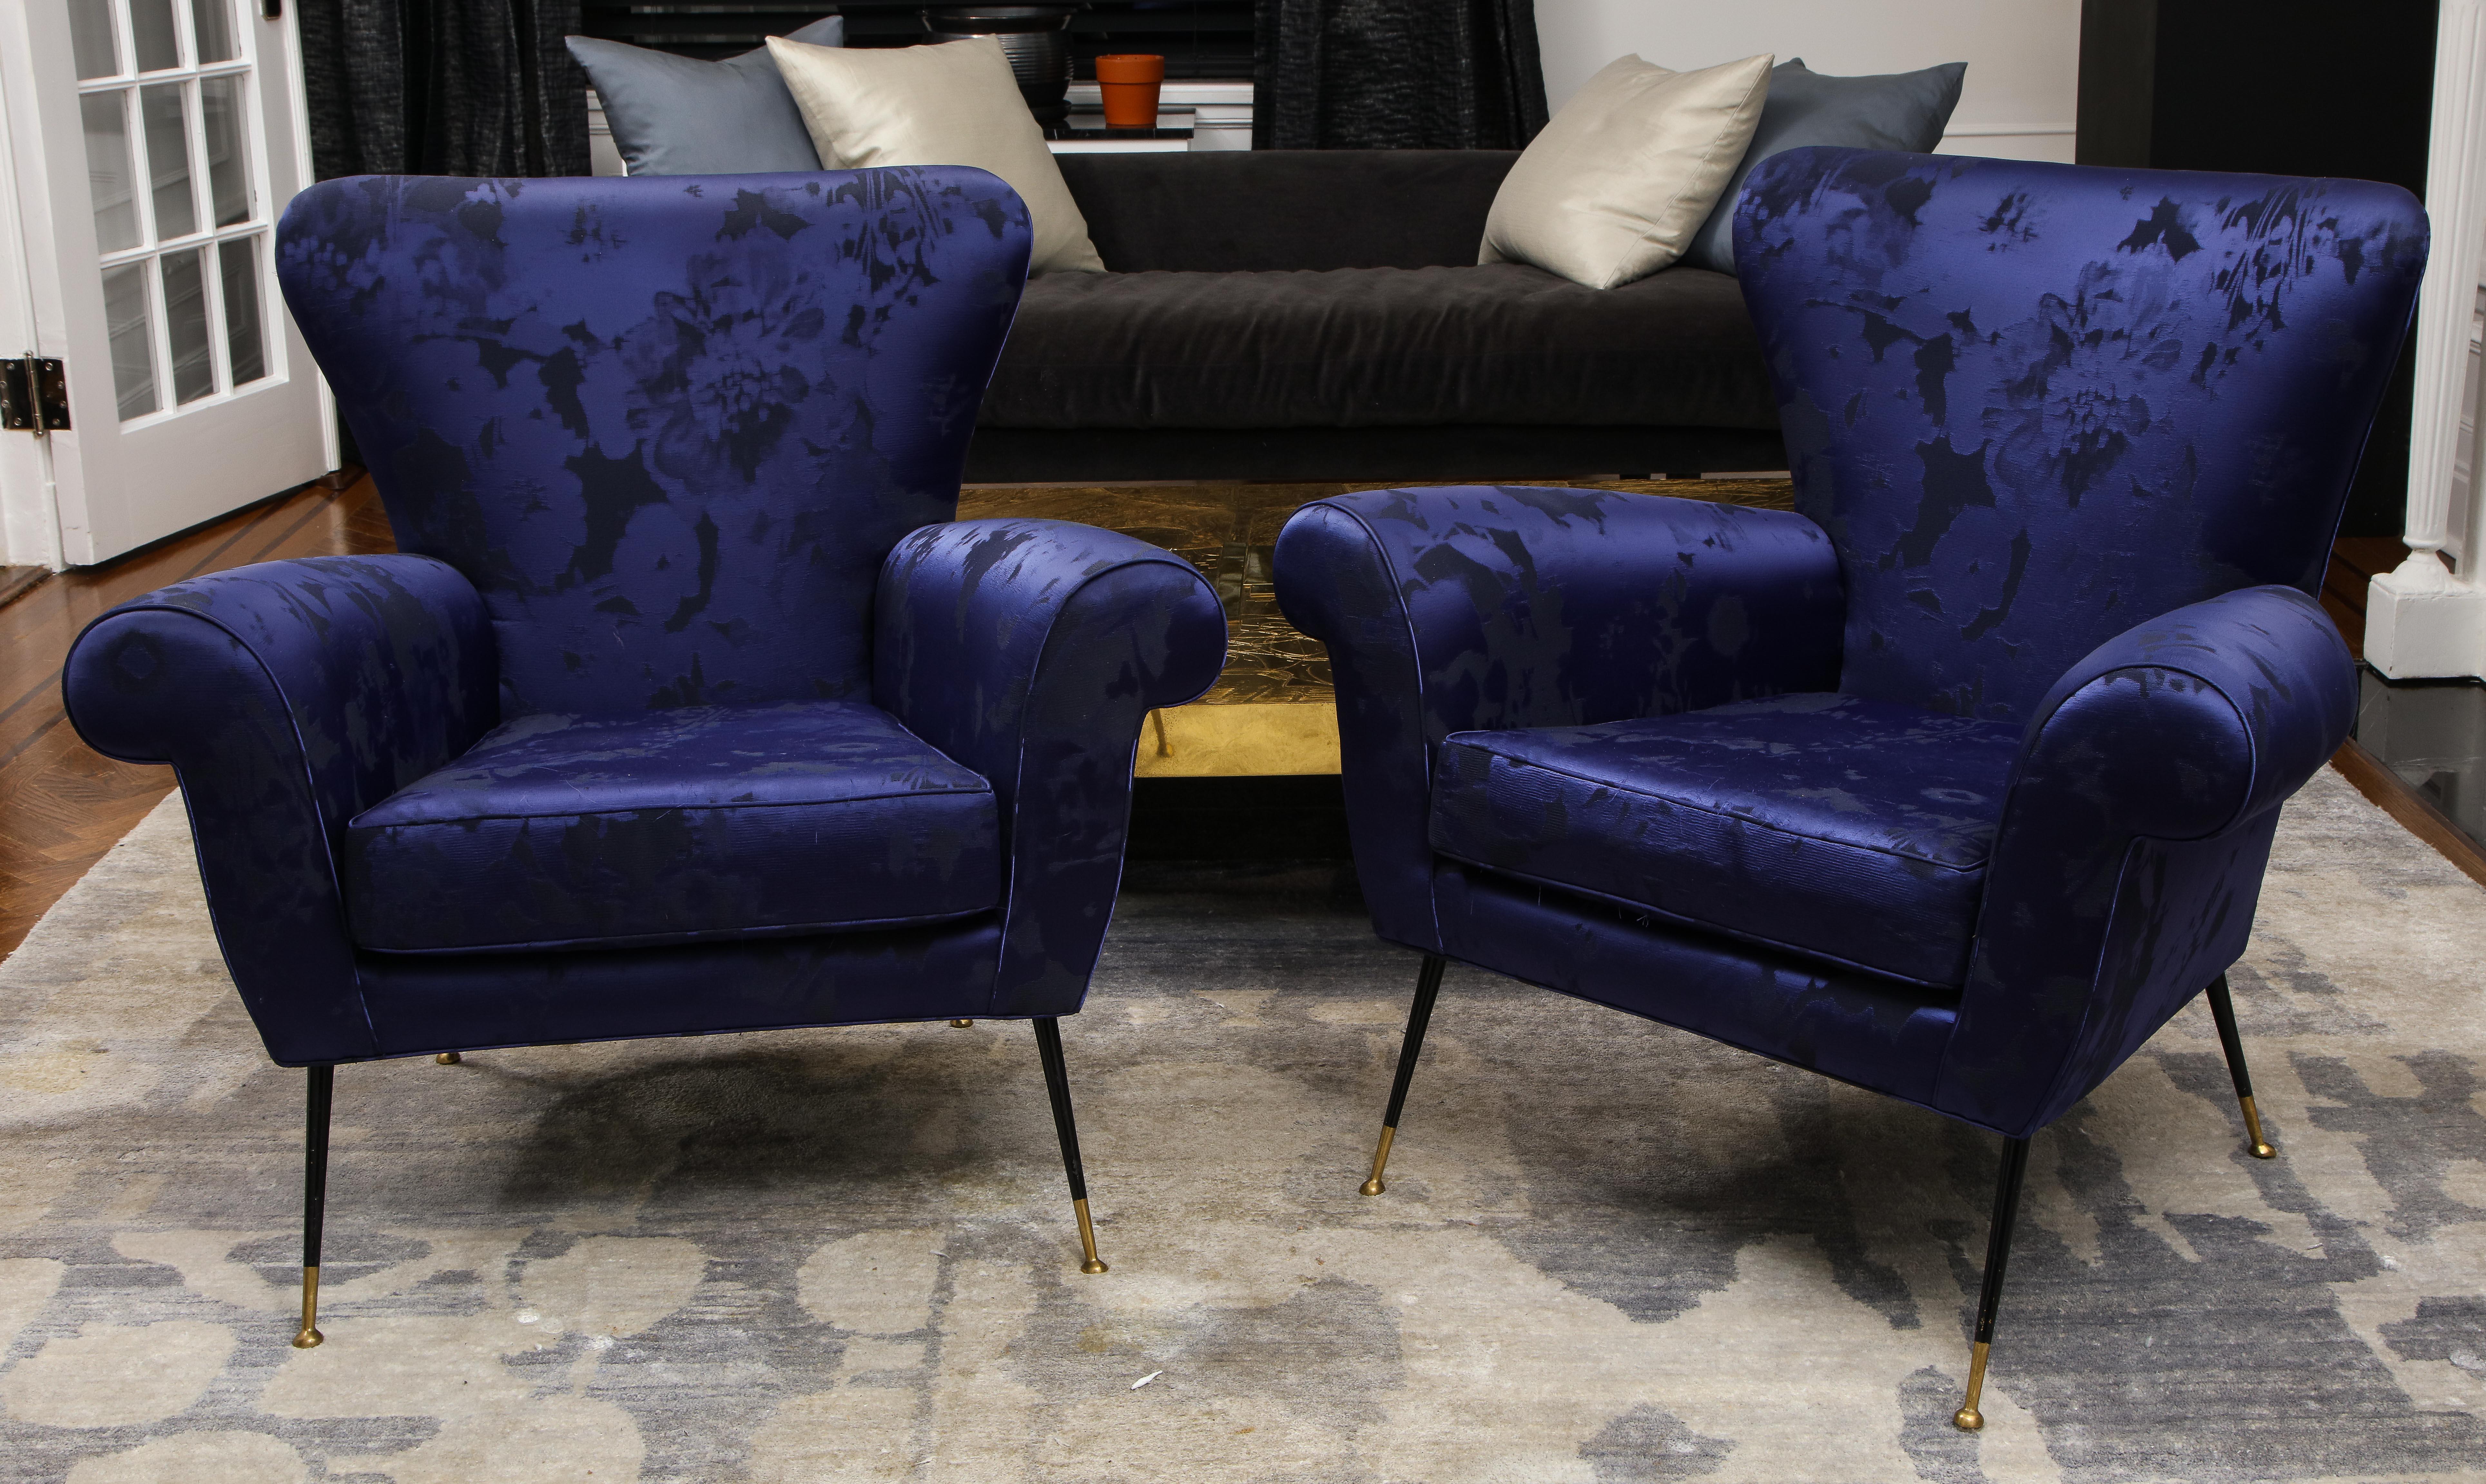 Pair of 1960s Gigi Radice Italian armchairs available for immediate purchase. The chairs are upholstered in ultramarine fabric in 2016. Minor wear and blemishes show on upholstery that are consistent with age and use but overall in good condition.